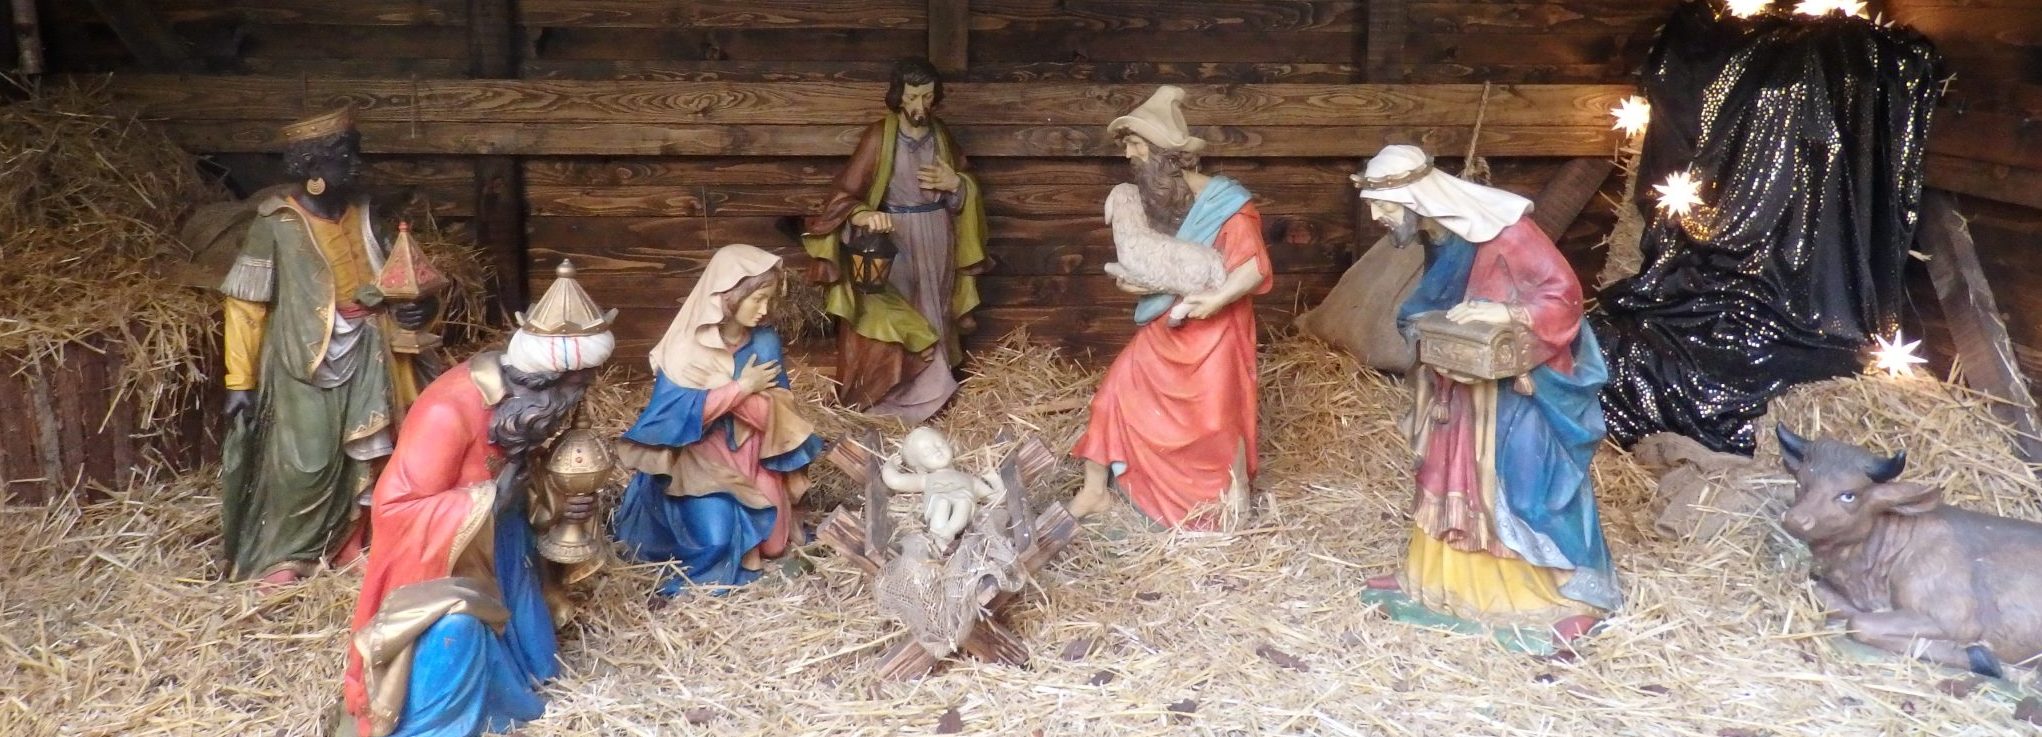 Christmas markets in Germany always include a nativity scene like this one in Oldenburg.